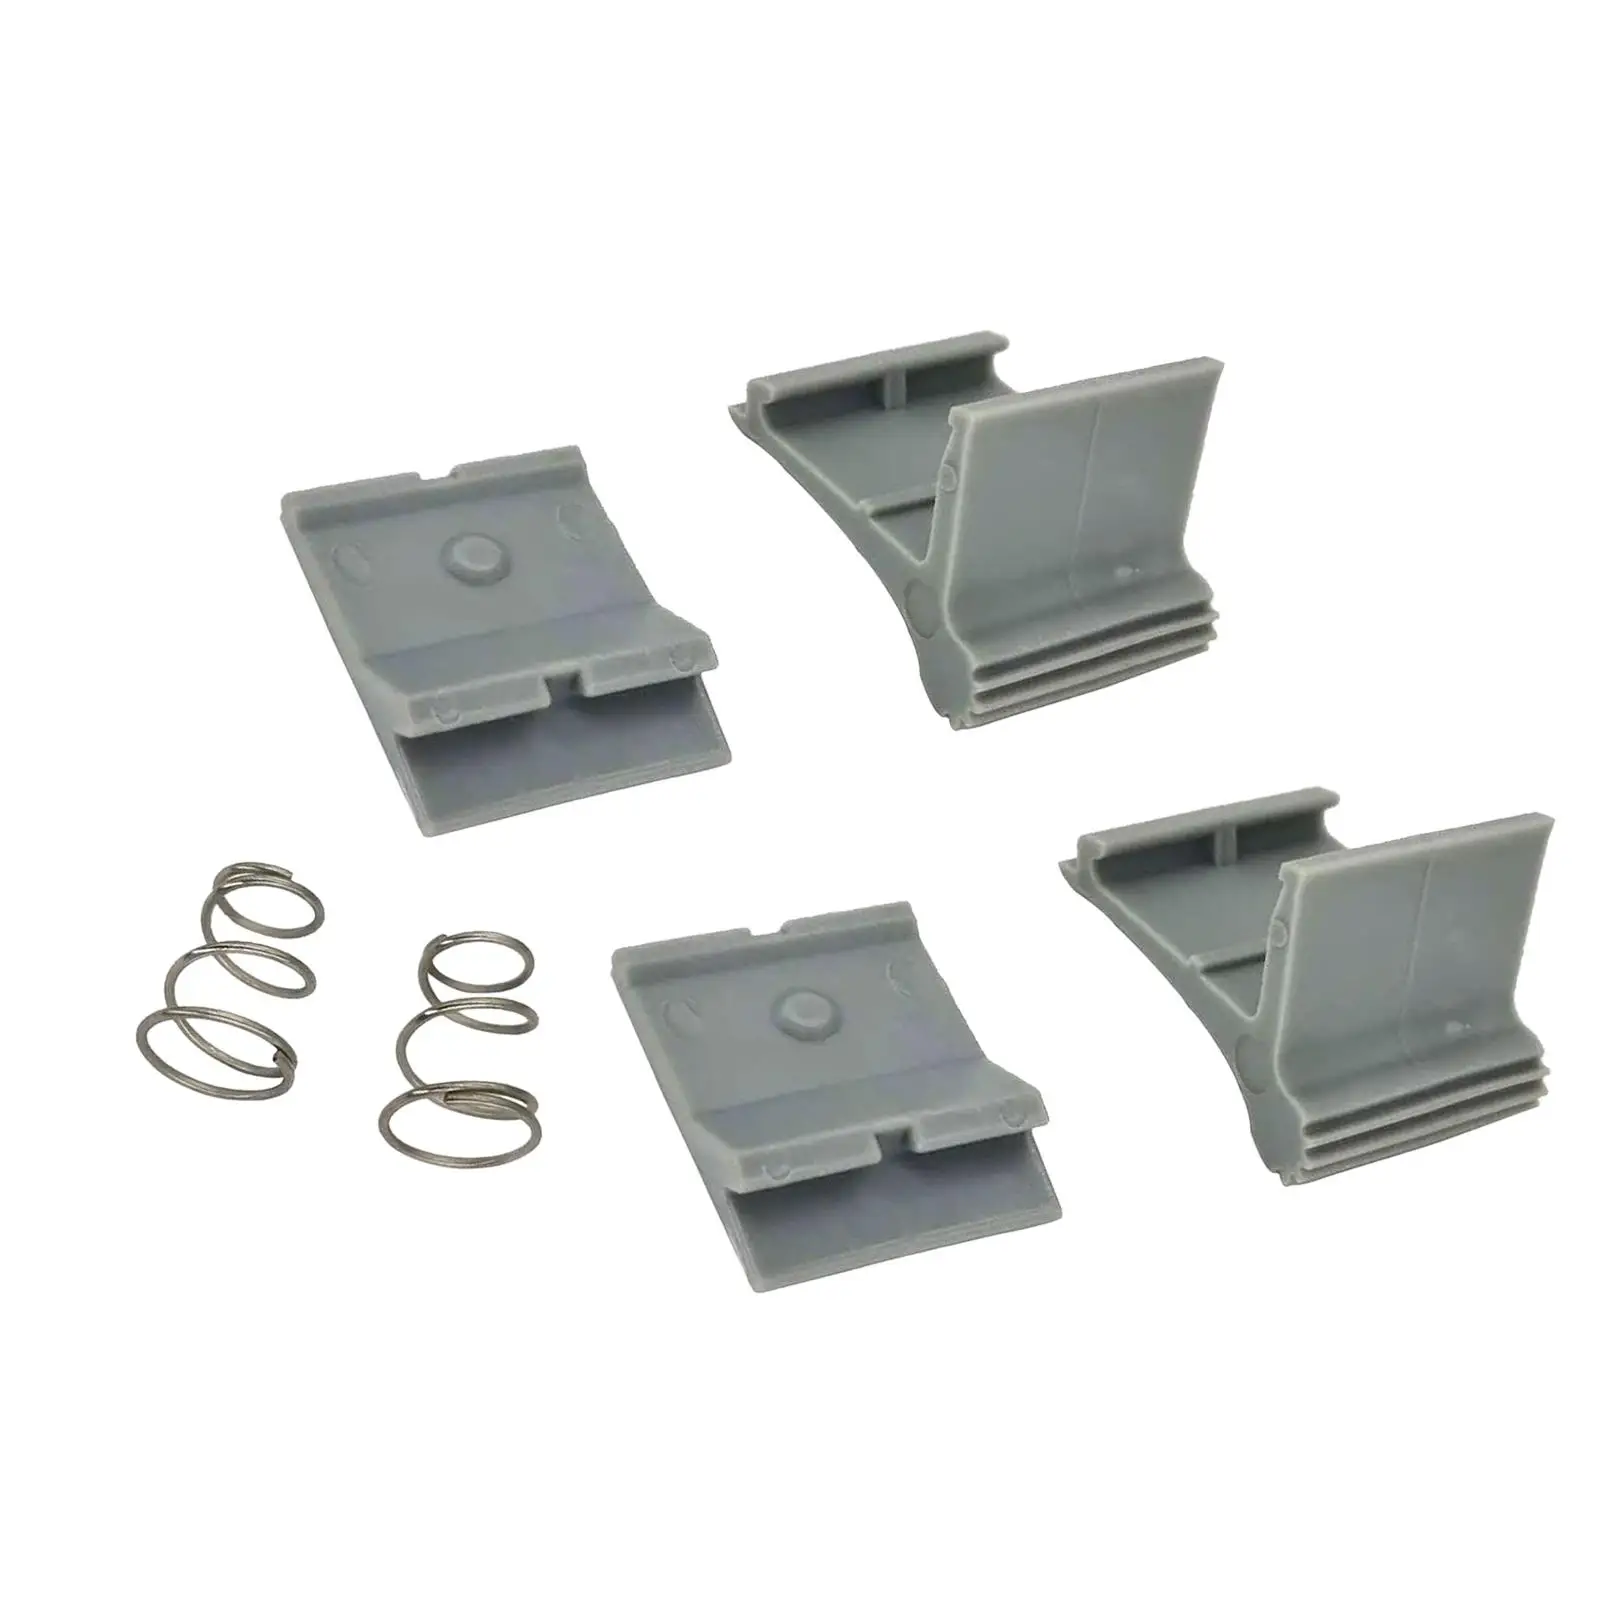 Awning Arm Slider Catch Set Durable Repair Parts Assembly Replaces Accessory Easy to Install for Camper Trailer